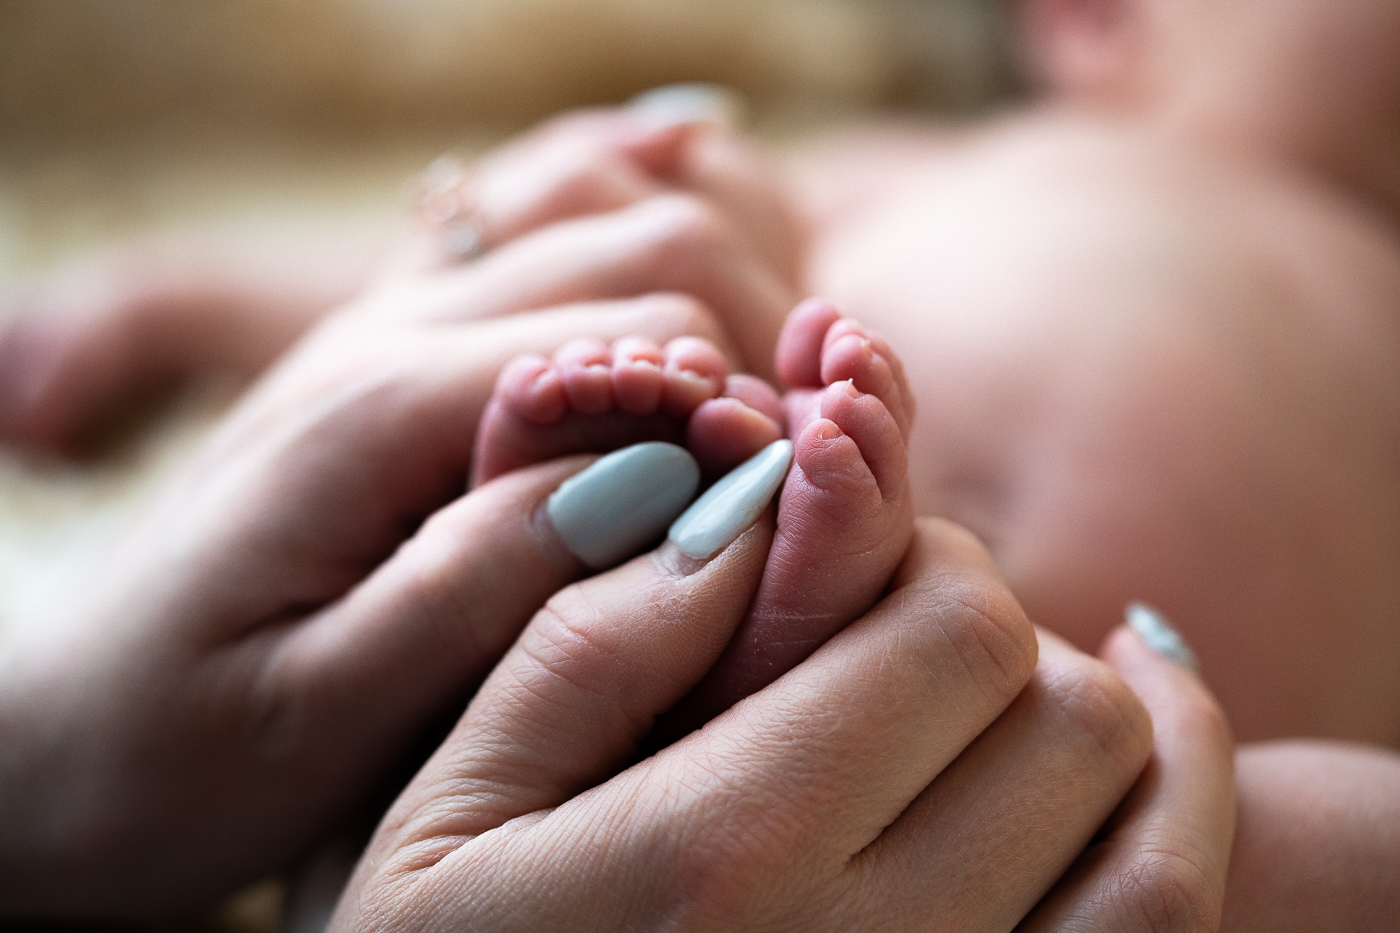 Close-up photograph of a mother's hands holding her baby's feet. The mother's hands are gentle and loving, and the baby's feet are tiny and delicate. The image conveys a sense of warmth, love, and protection.